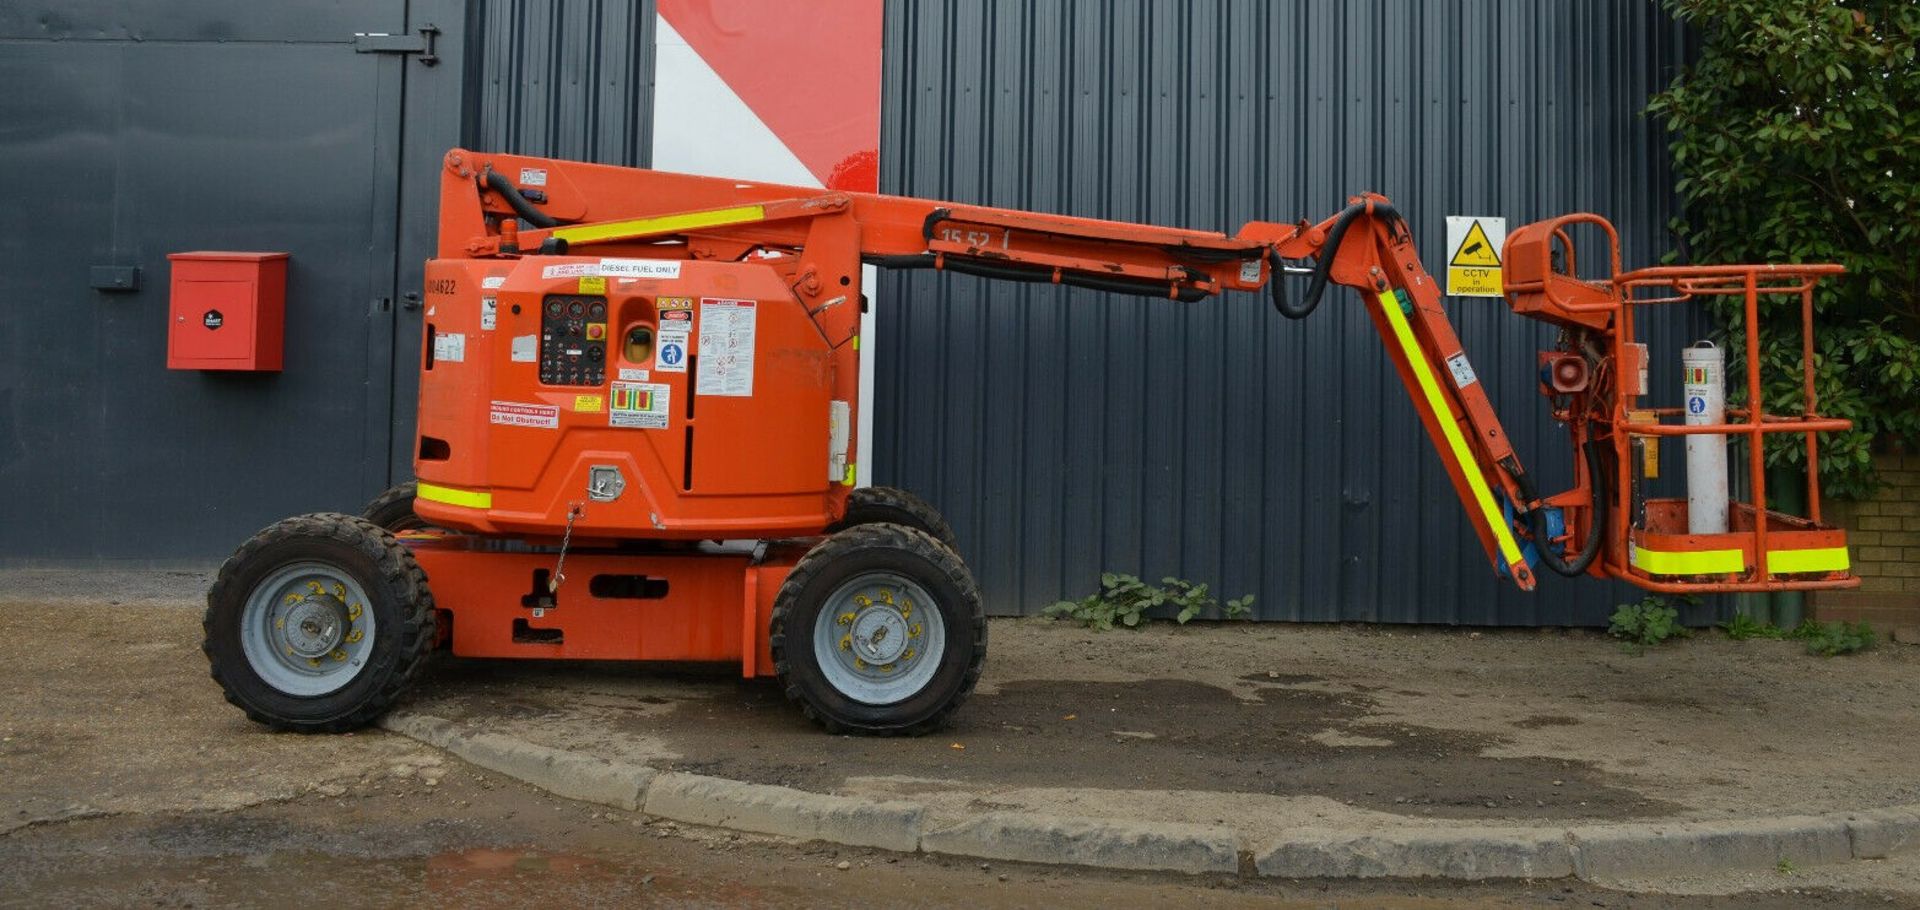 Genie Z-34/22 Articulated Boom 2009 - Image 12 of 12